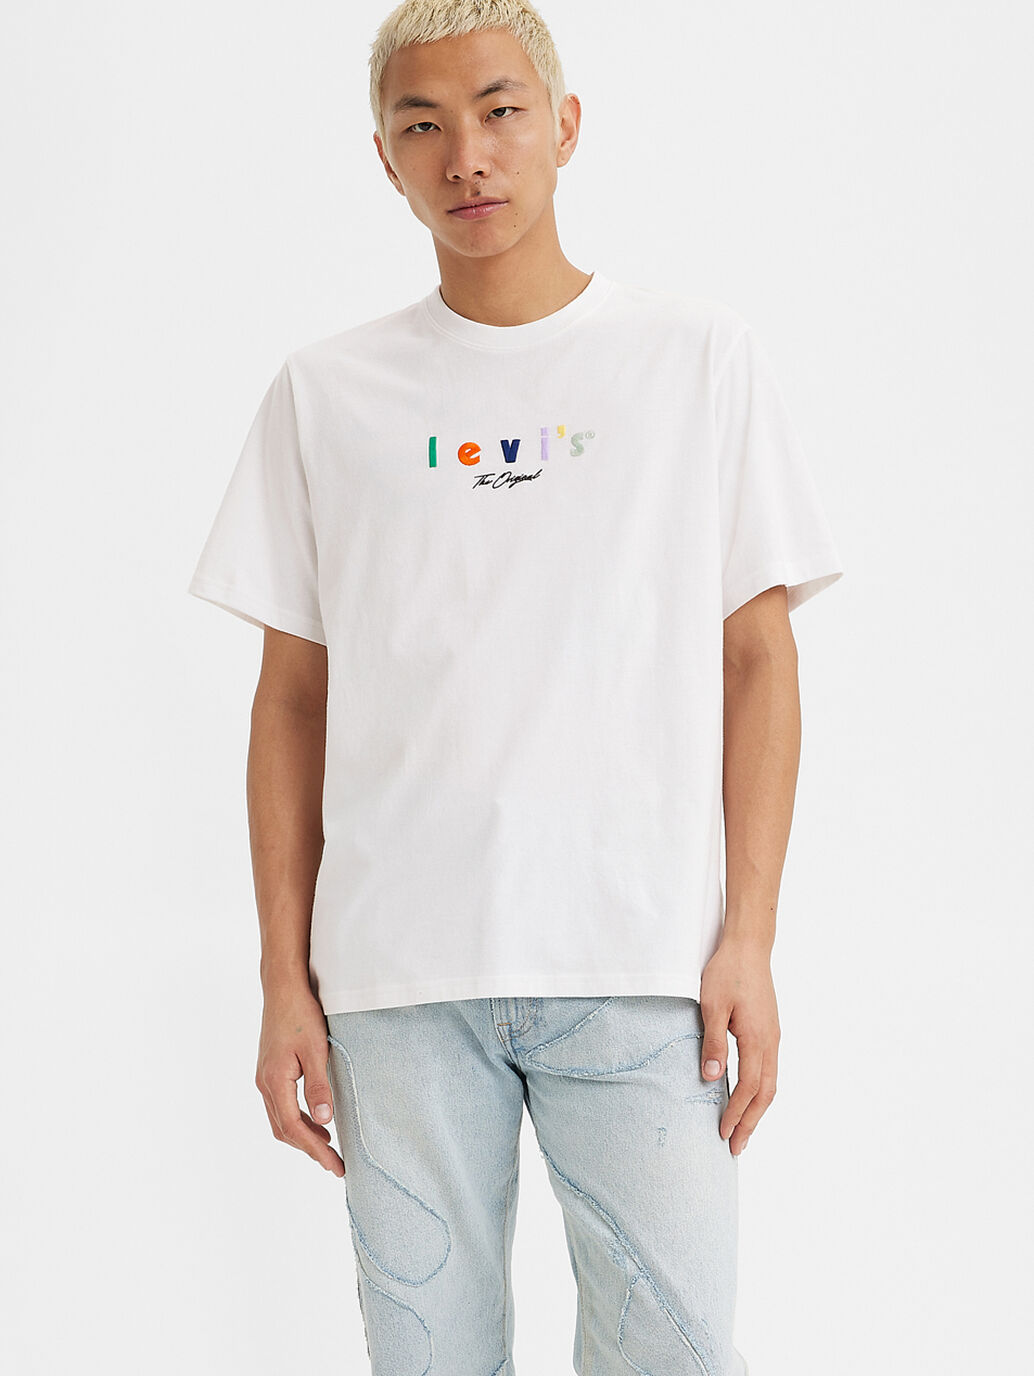 White Relaxed Fit Graphic Tee For Men - Short-Sleeve Tees